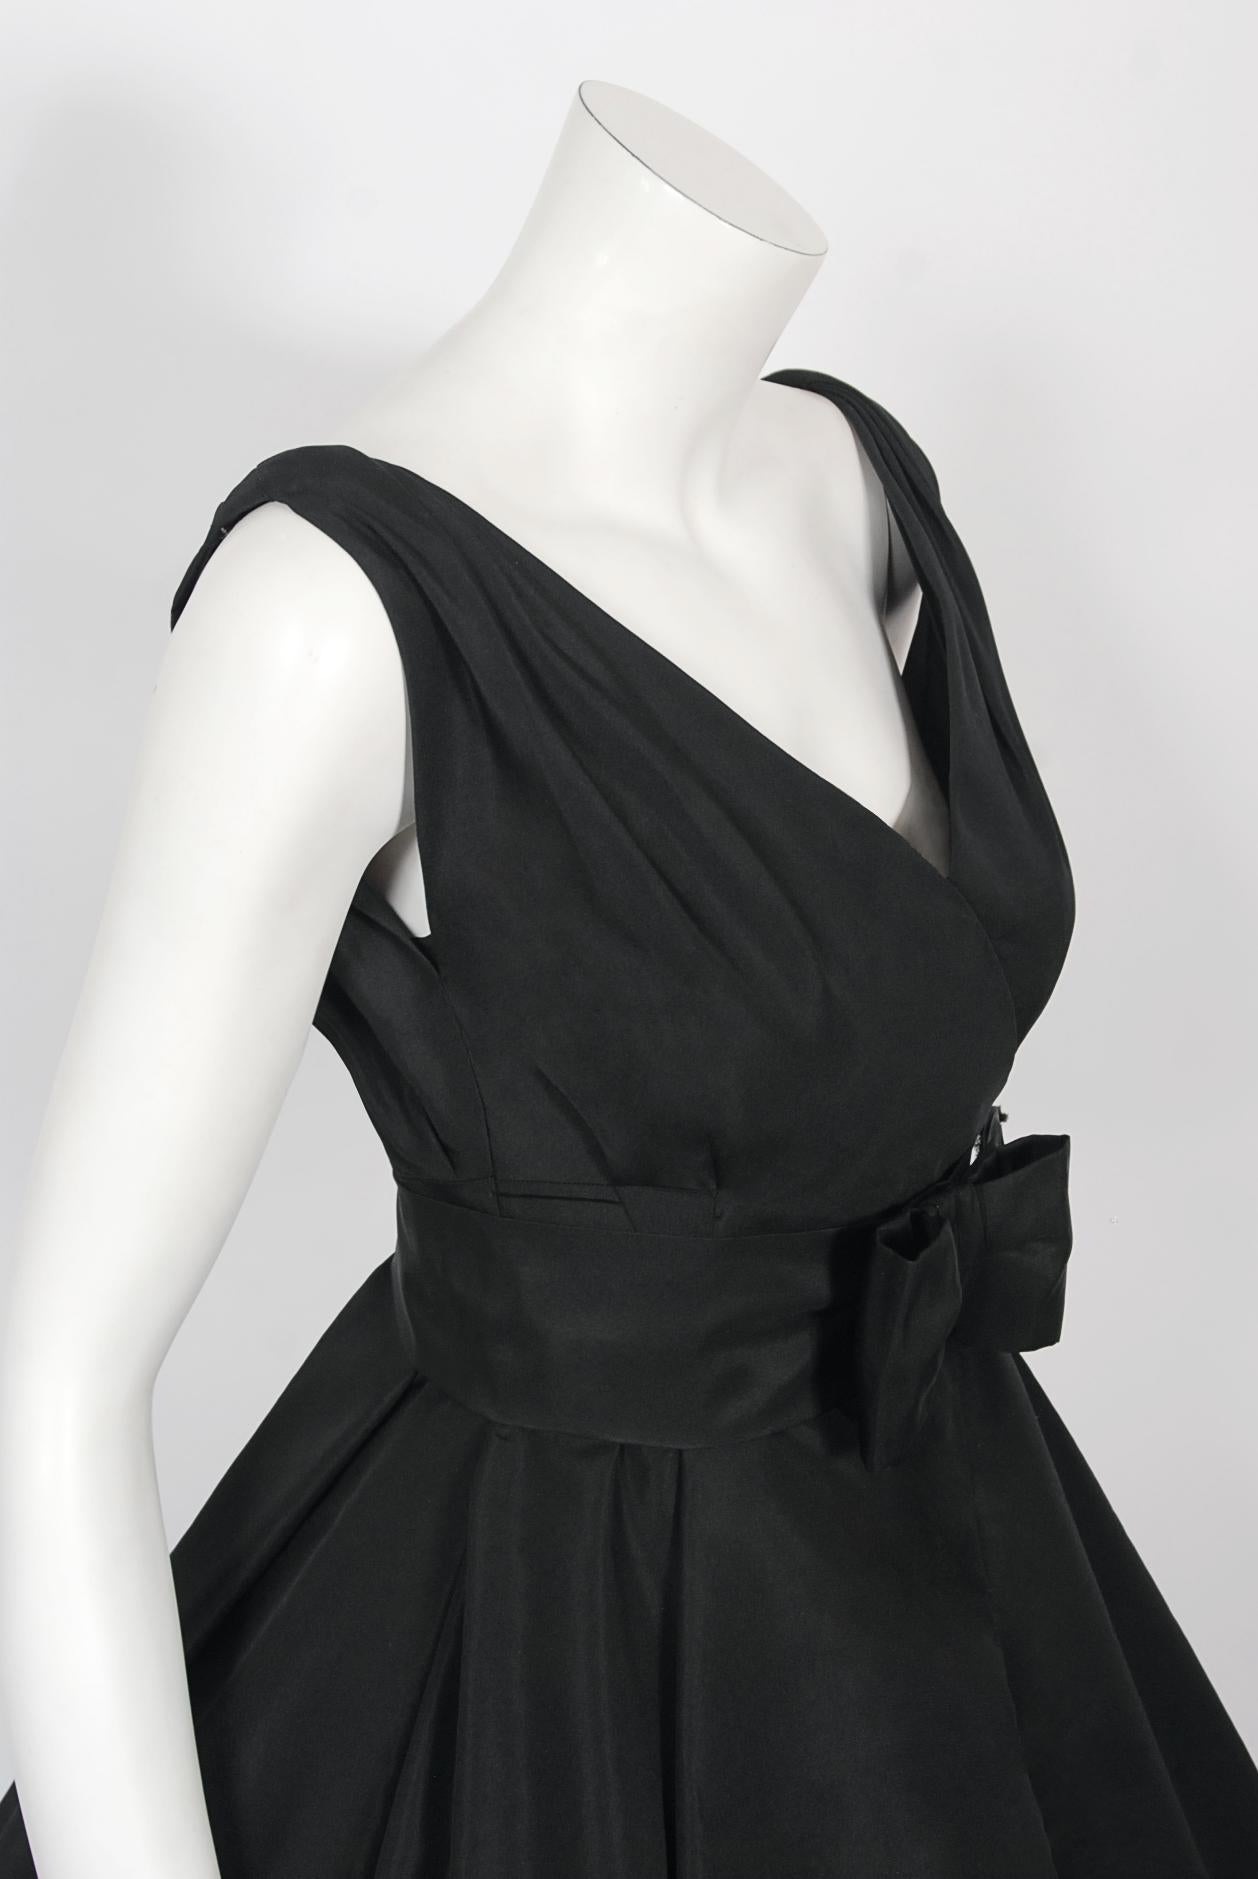 Vintage 1956 Christian Dior Haute Couture Documented Black Silk 'New Look' Dress 1